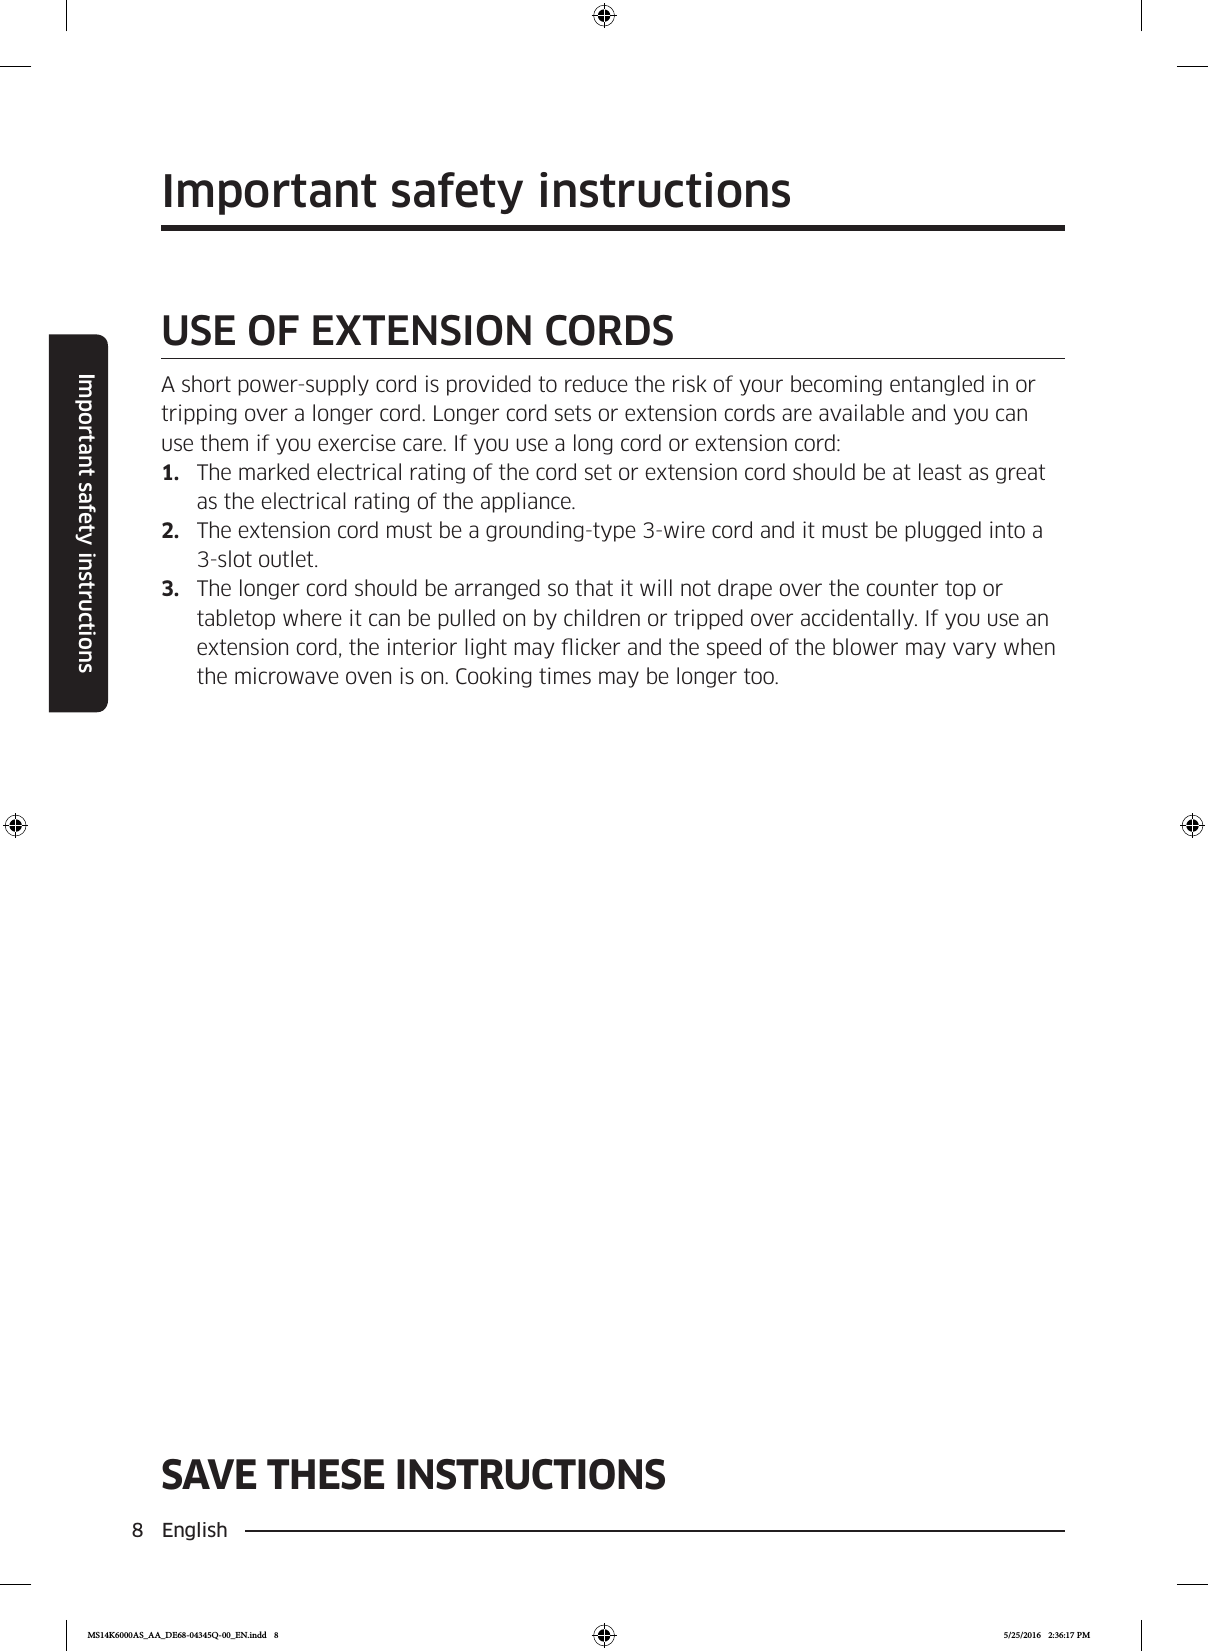 8  EnglishImportant safety instructionsSAVE THESE INSTRUCTIONSImportant safety instructionsSAVE THESE INSTRUCTIONSUSE OF EXTENSION CORDSA short power-supply cord is provided to reduce the risk of your becoming entangled in or tripping over a longer cord. Longer cord sets or extension cords are available and you can use them if you exercise care. If you use a long cord or extension cord:1.  The marked electrical rating of the cord set or extension cord should be at least as great as the electrical rating of the appliance.2.  The extension cord must be a grounding-type 3-wire cord and it must be plugged into a 3-slot outlet.3.  The longer cord should be arranged so that it will not drape over the counter top or tabletop where it can be pulled on by children or tripped over accidentally. If you use an extension cord, the interior light may icker and the speed of the blower may vary when the microwave oven is on. Cooking times may be longer too.MS14K6000AS_AA_DE68-04345Q-00_EN.indd   8 5/25/2016   2:36:17 PM